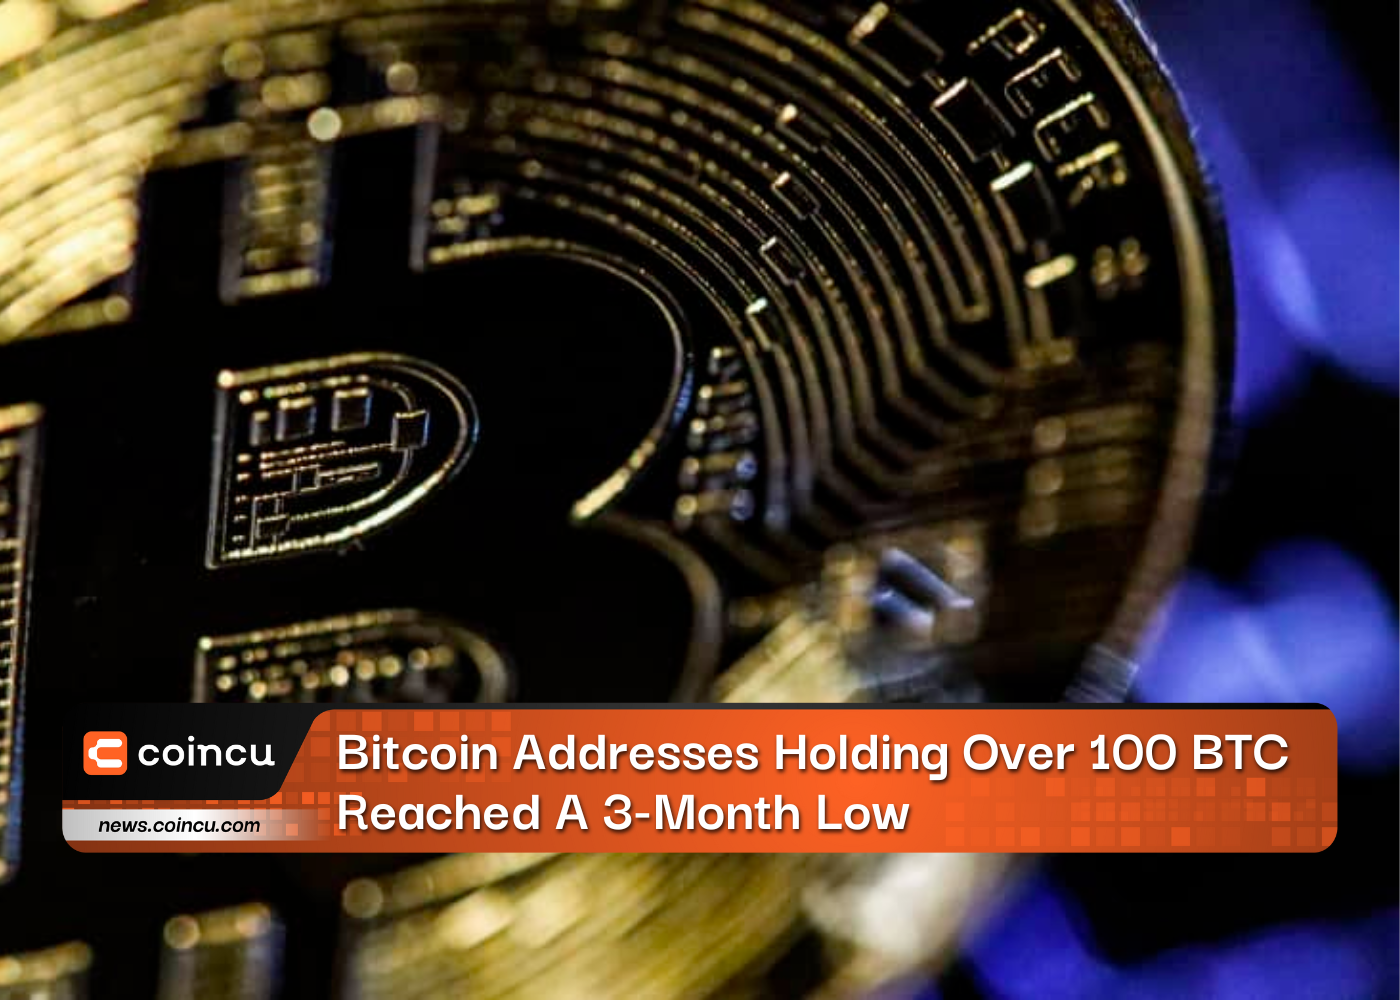 Bitcoin Addresses Holding Over 100 BTC Reached A 3-Month Low